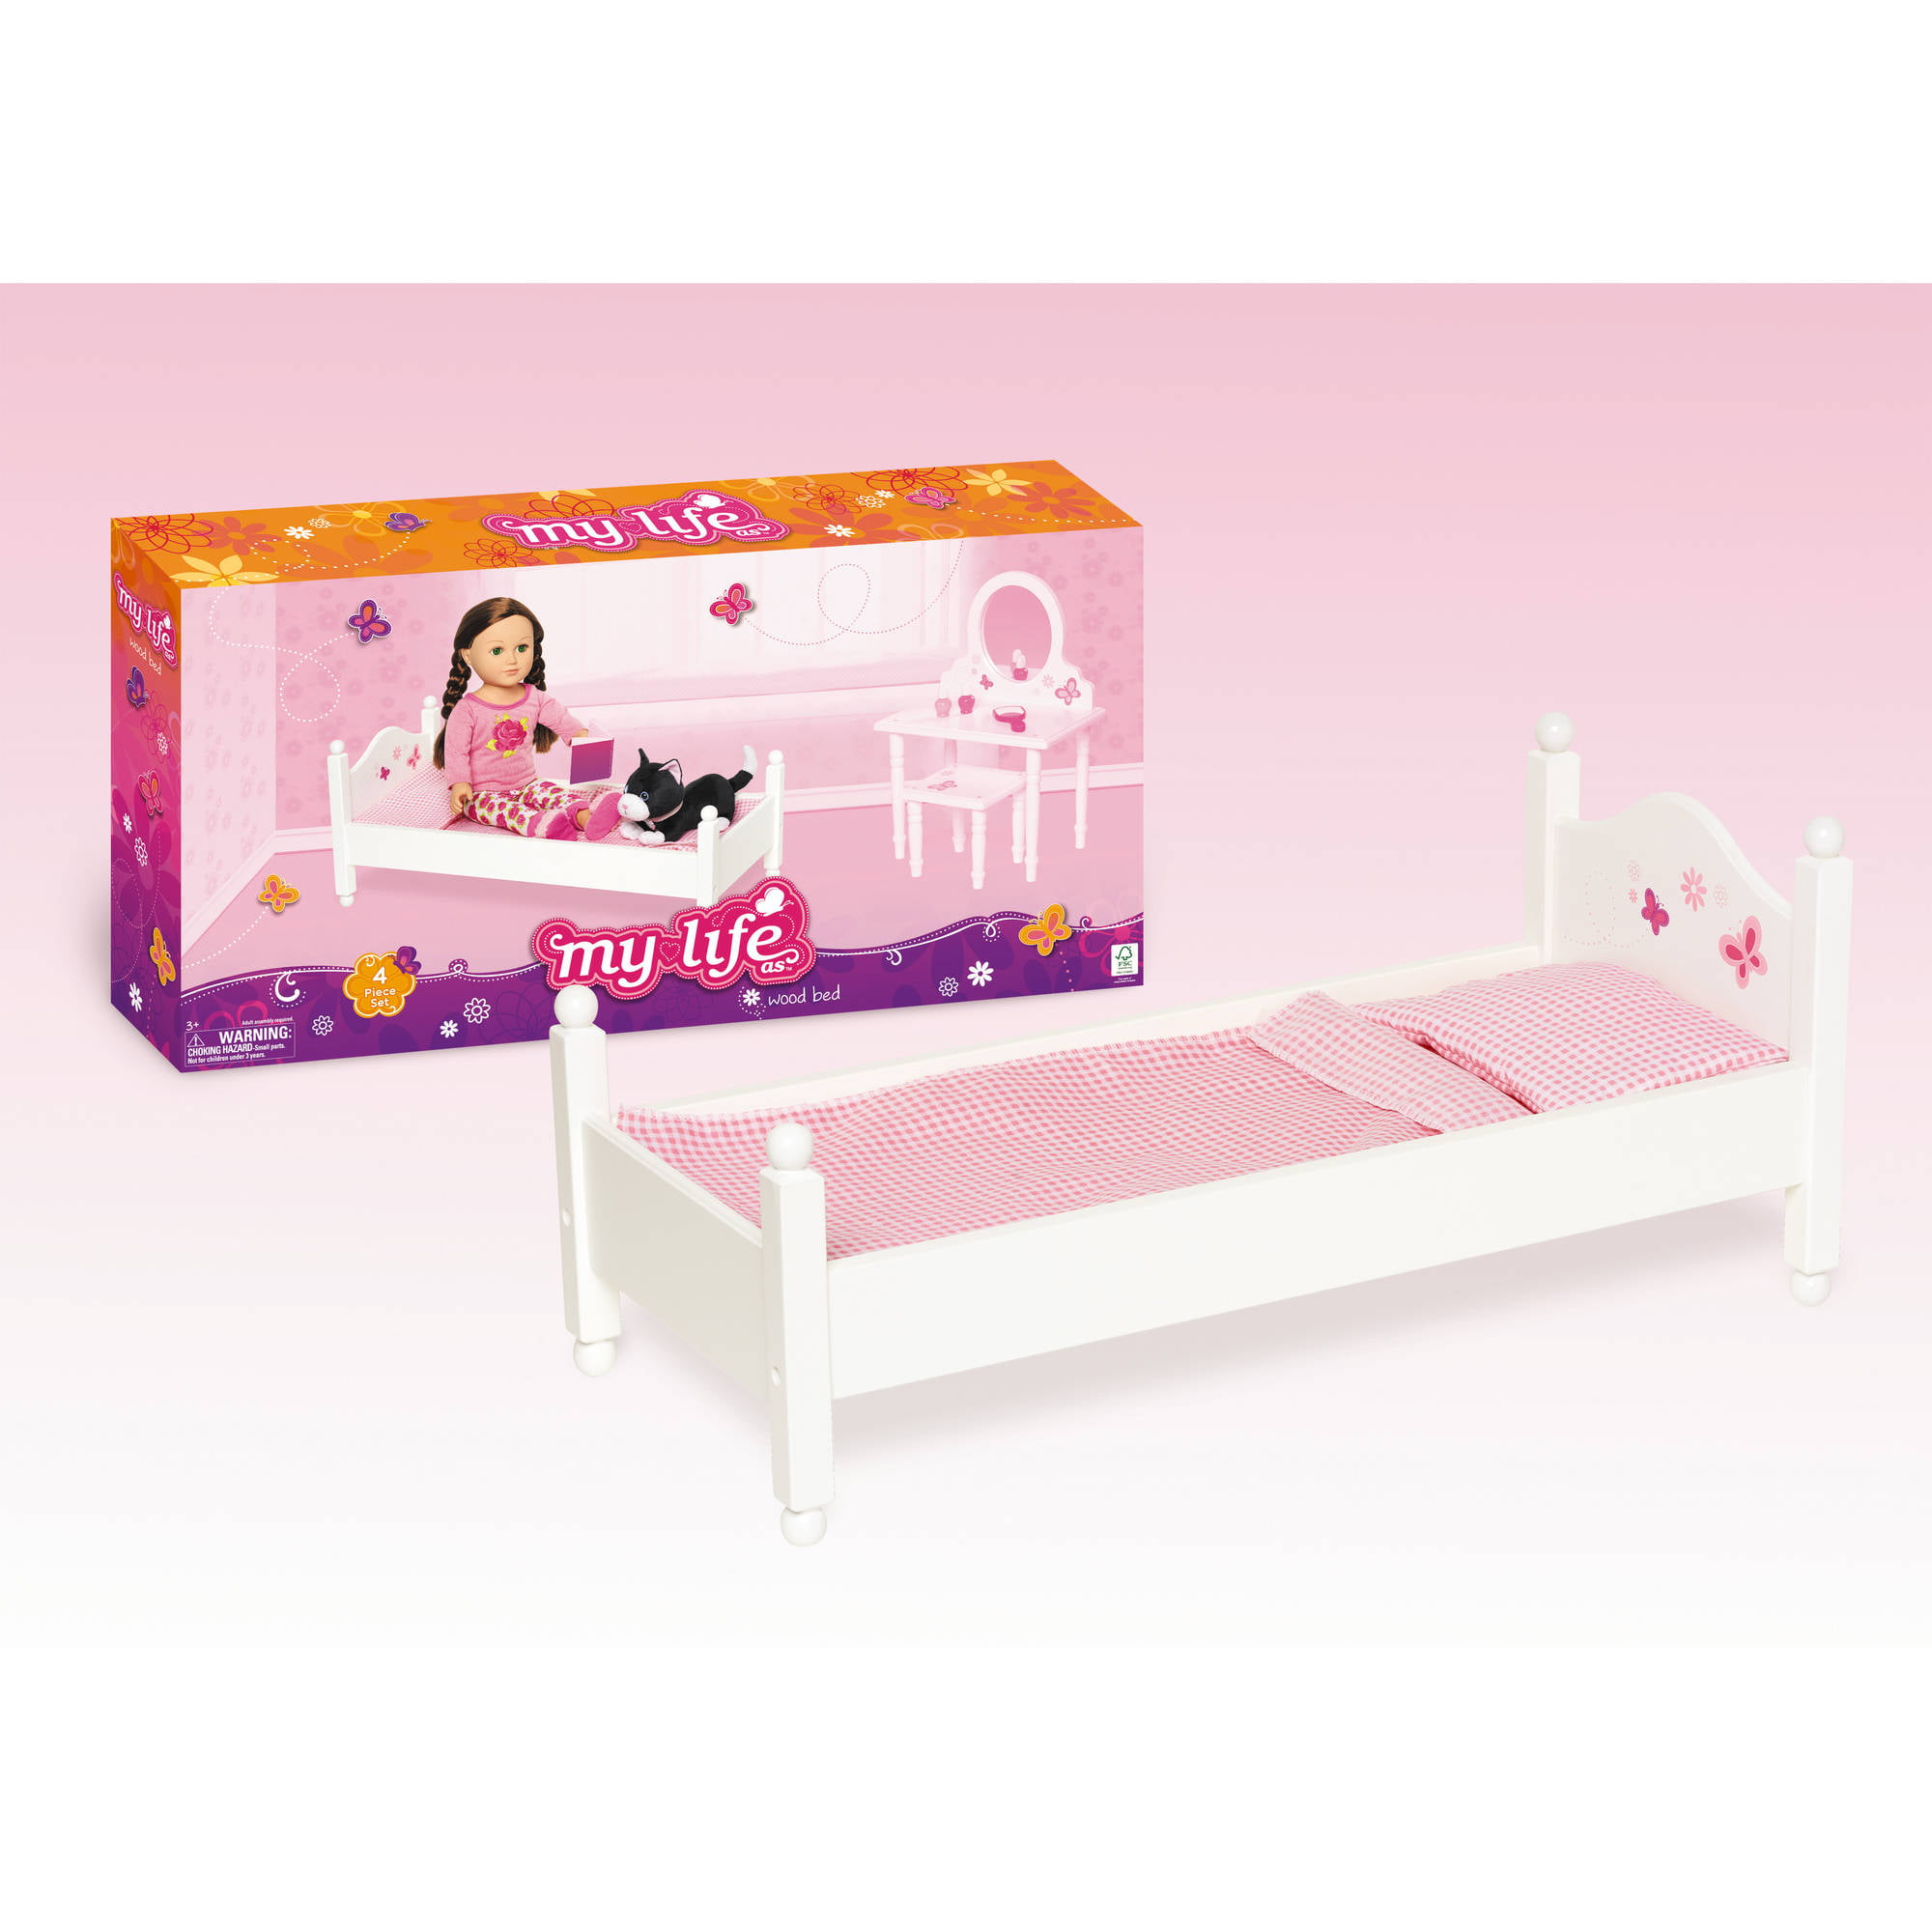 wooden doll beds for 18 inch dolls